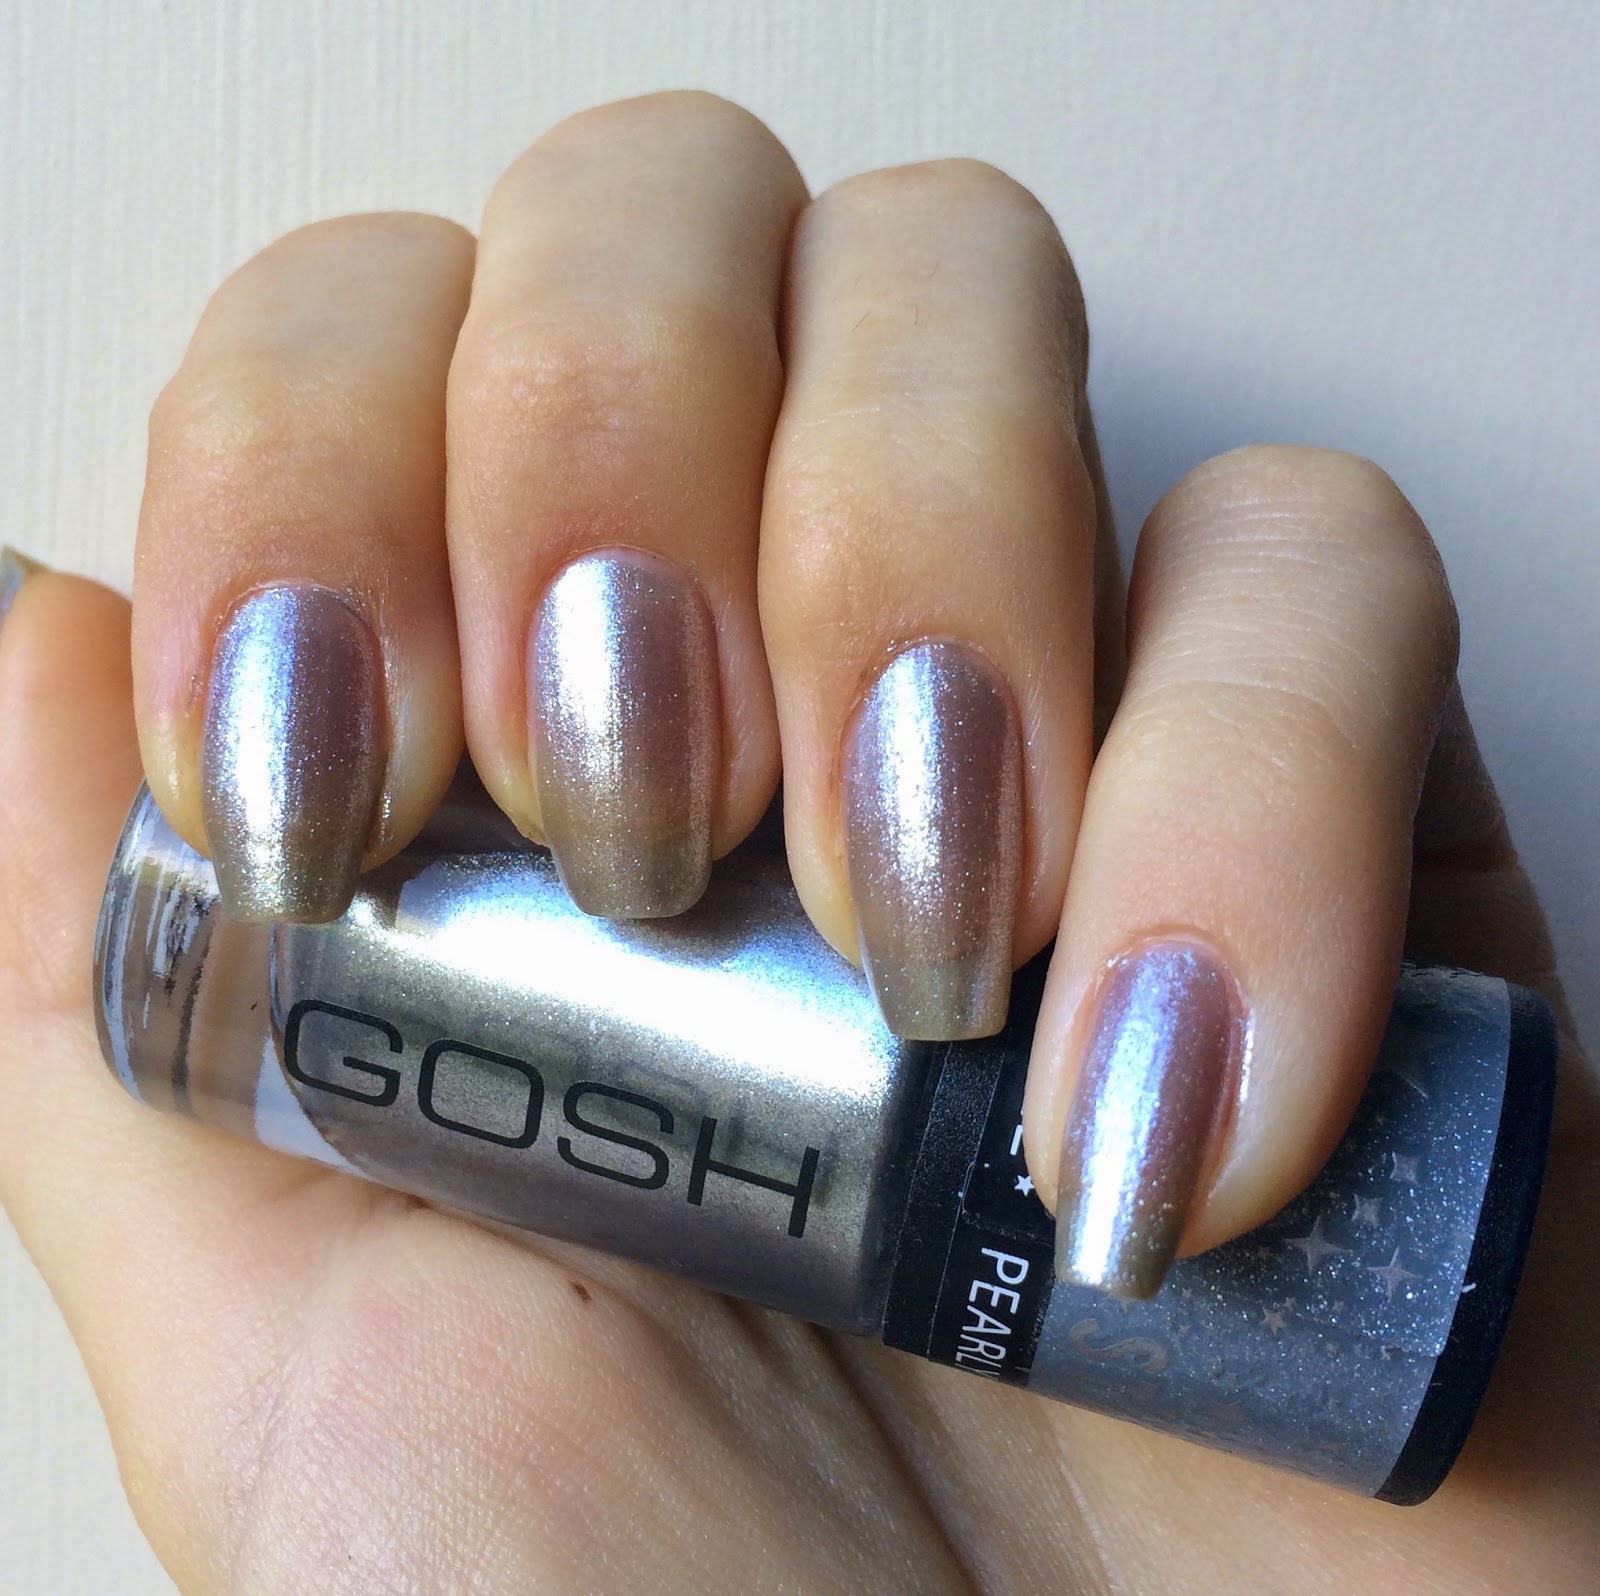 gosh-stardust-nail-lacquer-collection-2014-moonlight